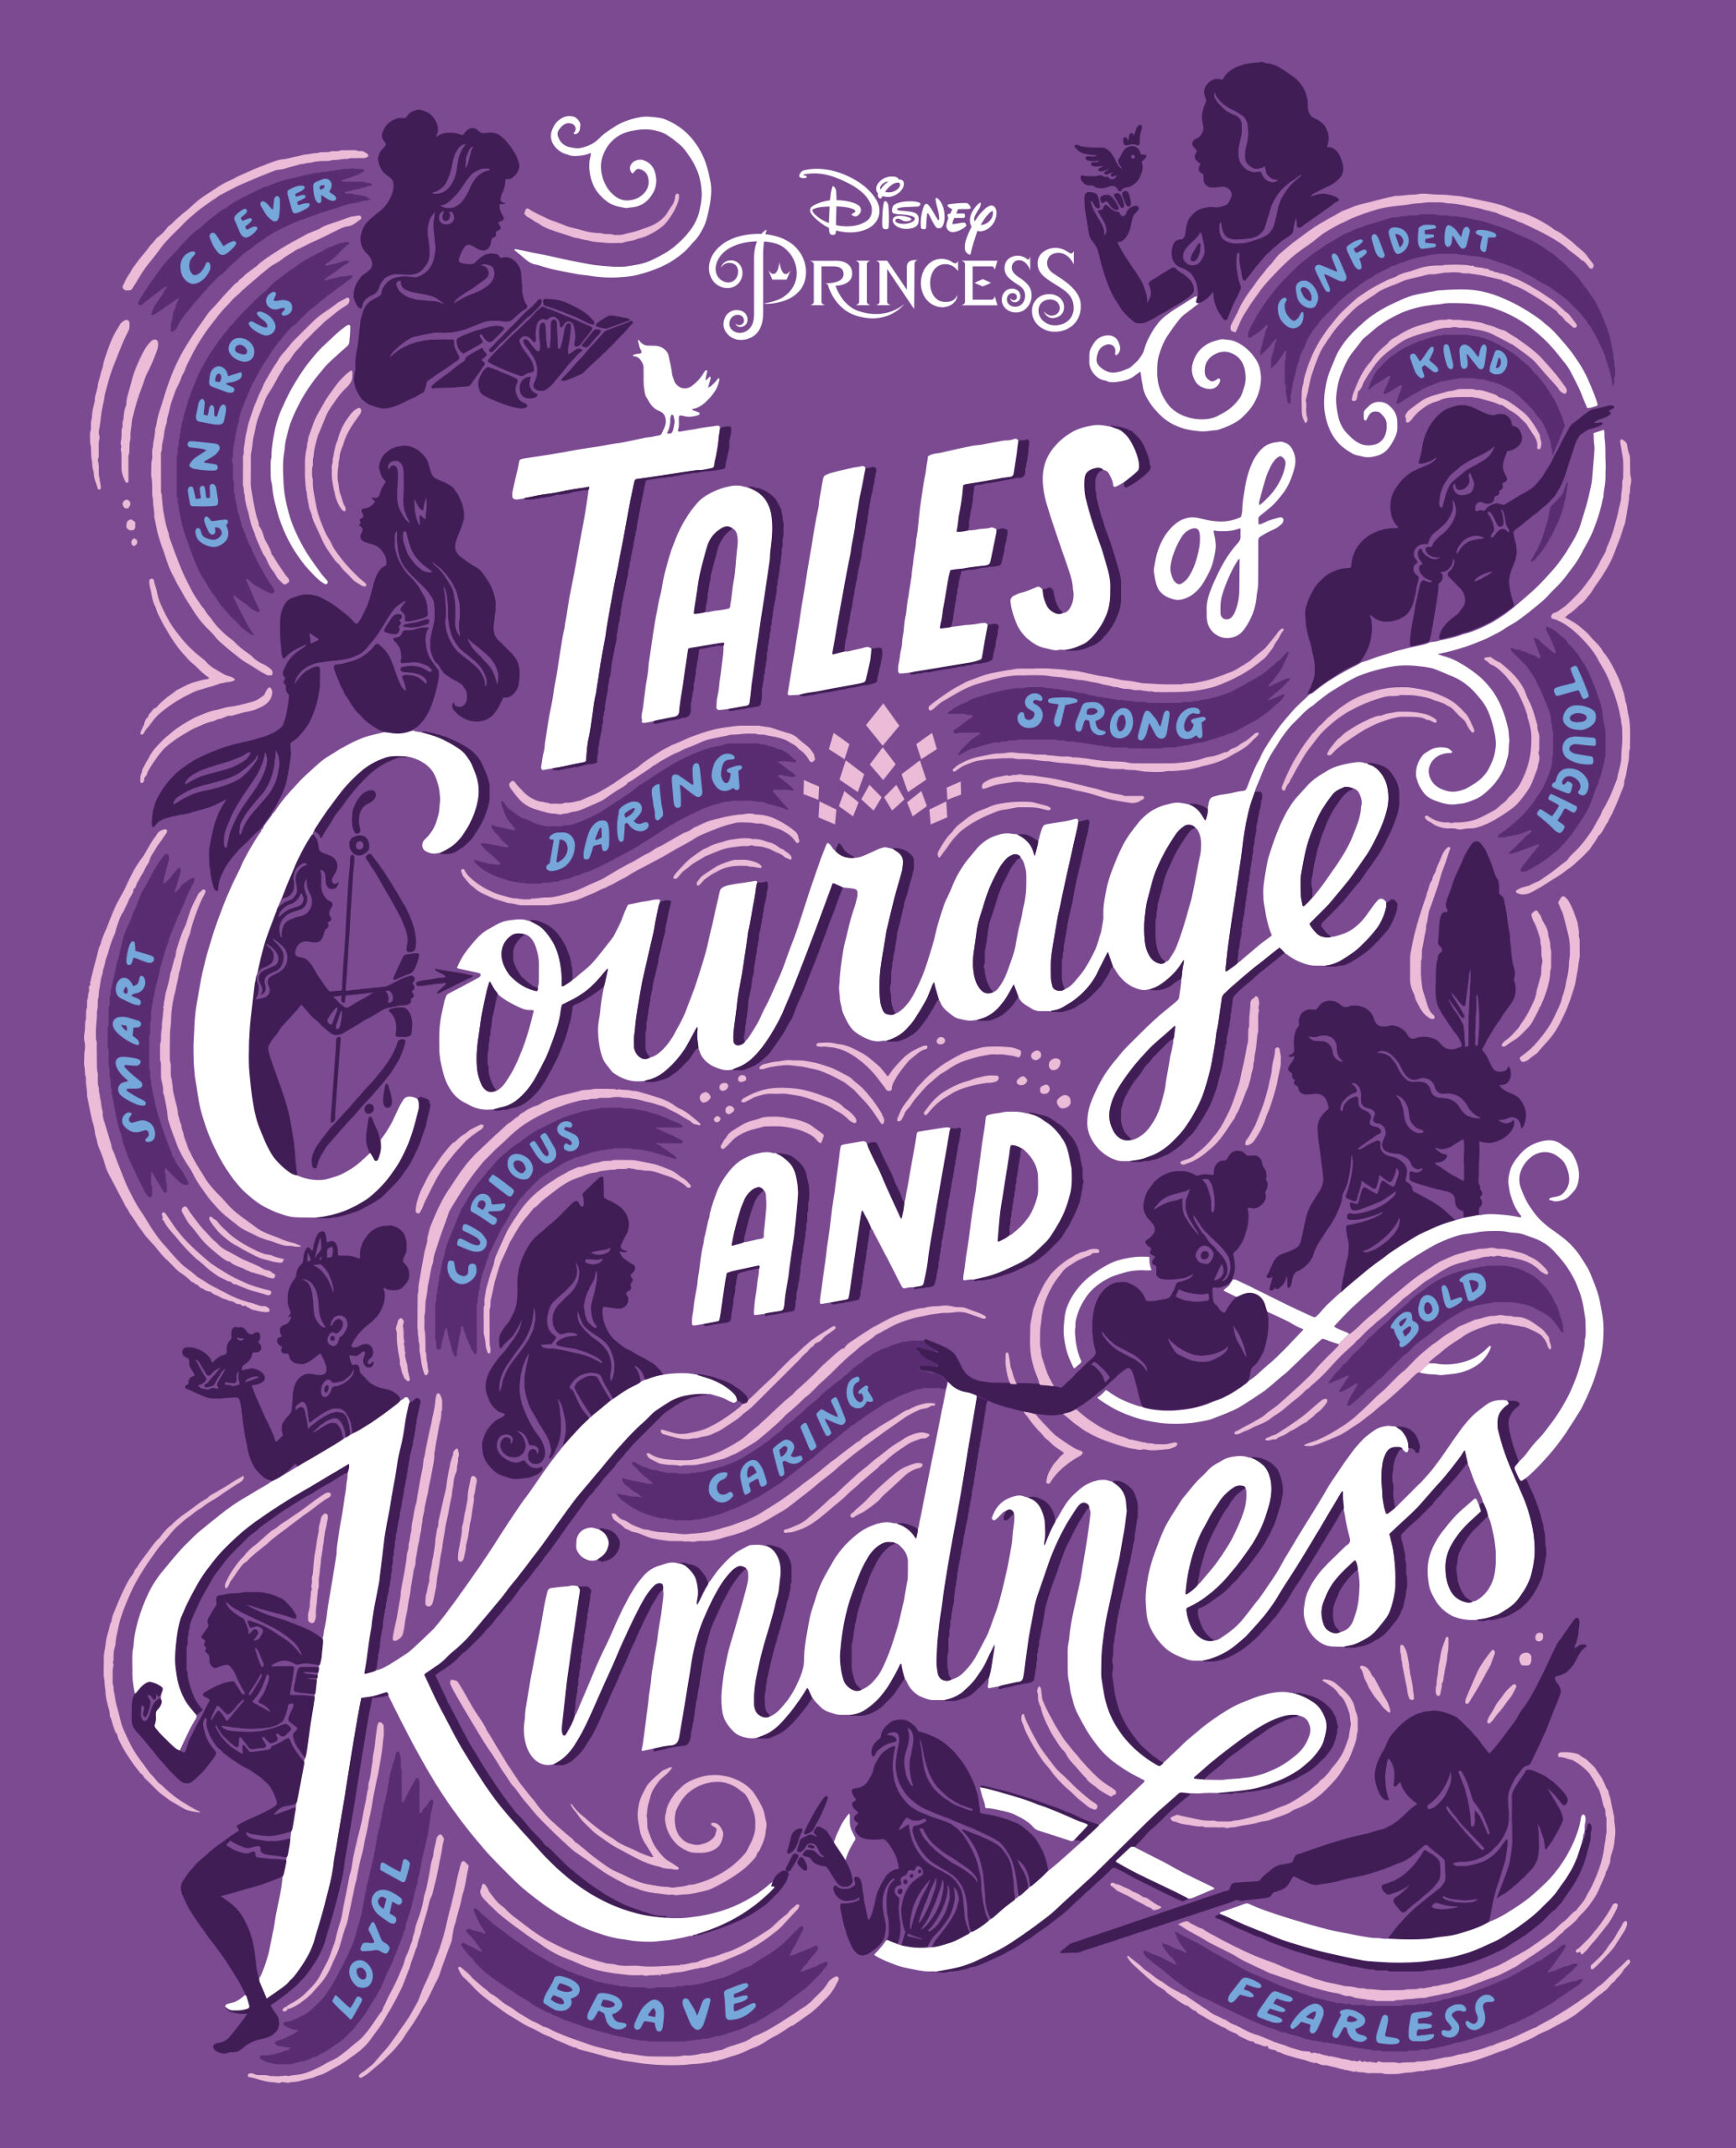 Disney Princess: Tales of Courage and Kindness: A stunning new